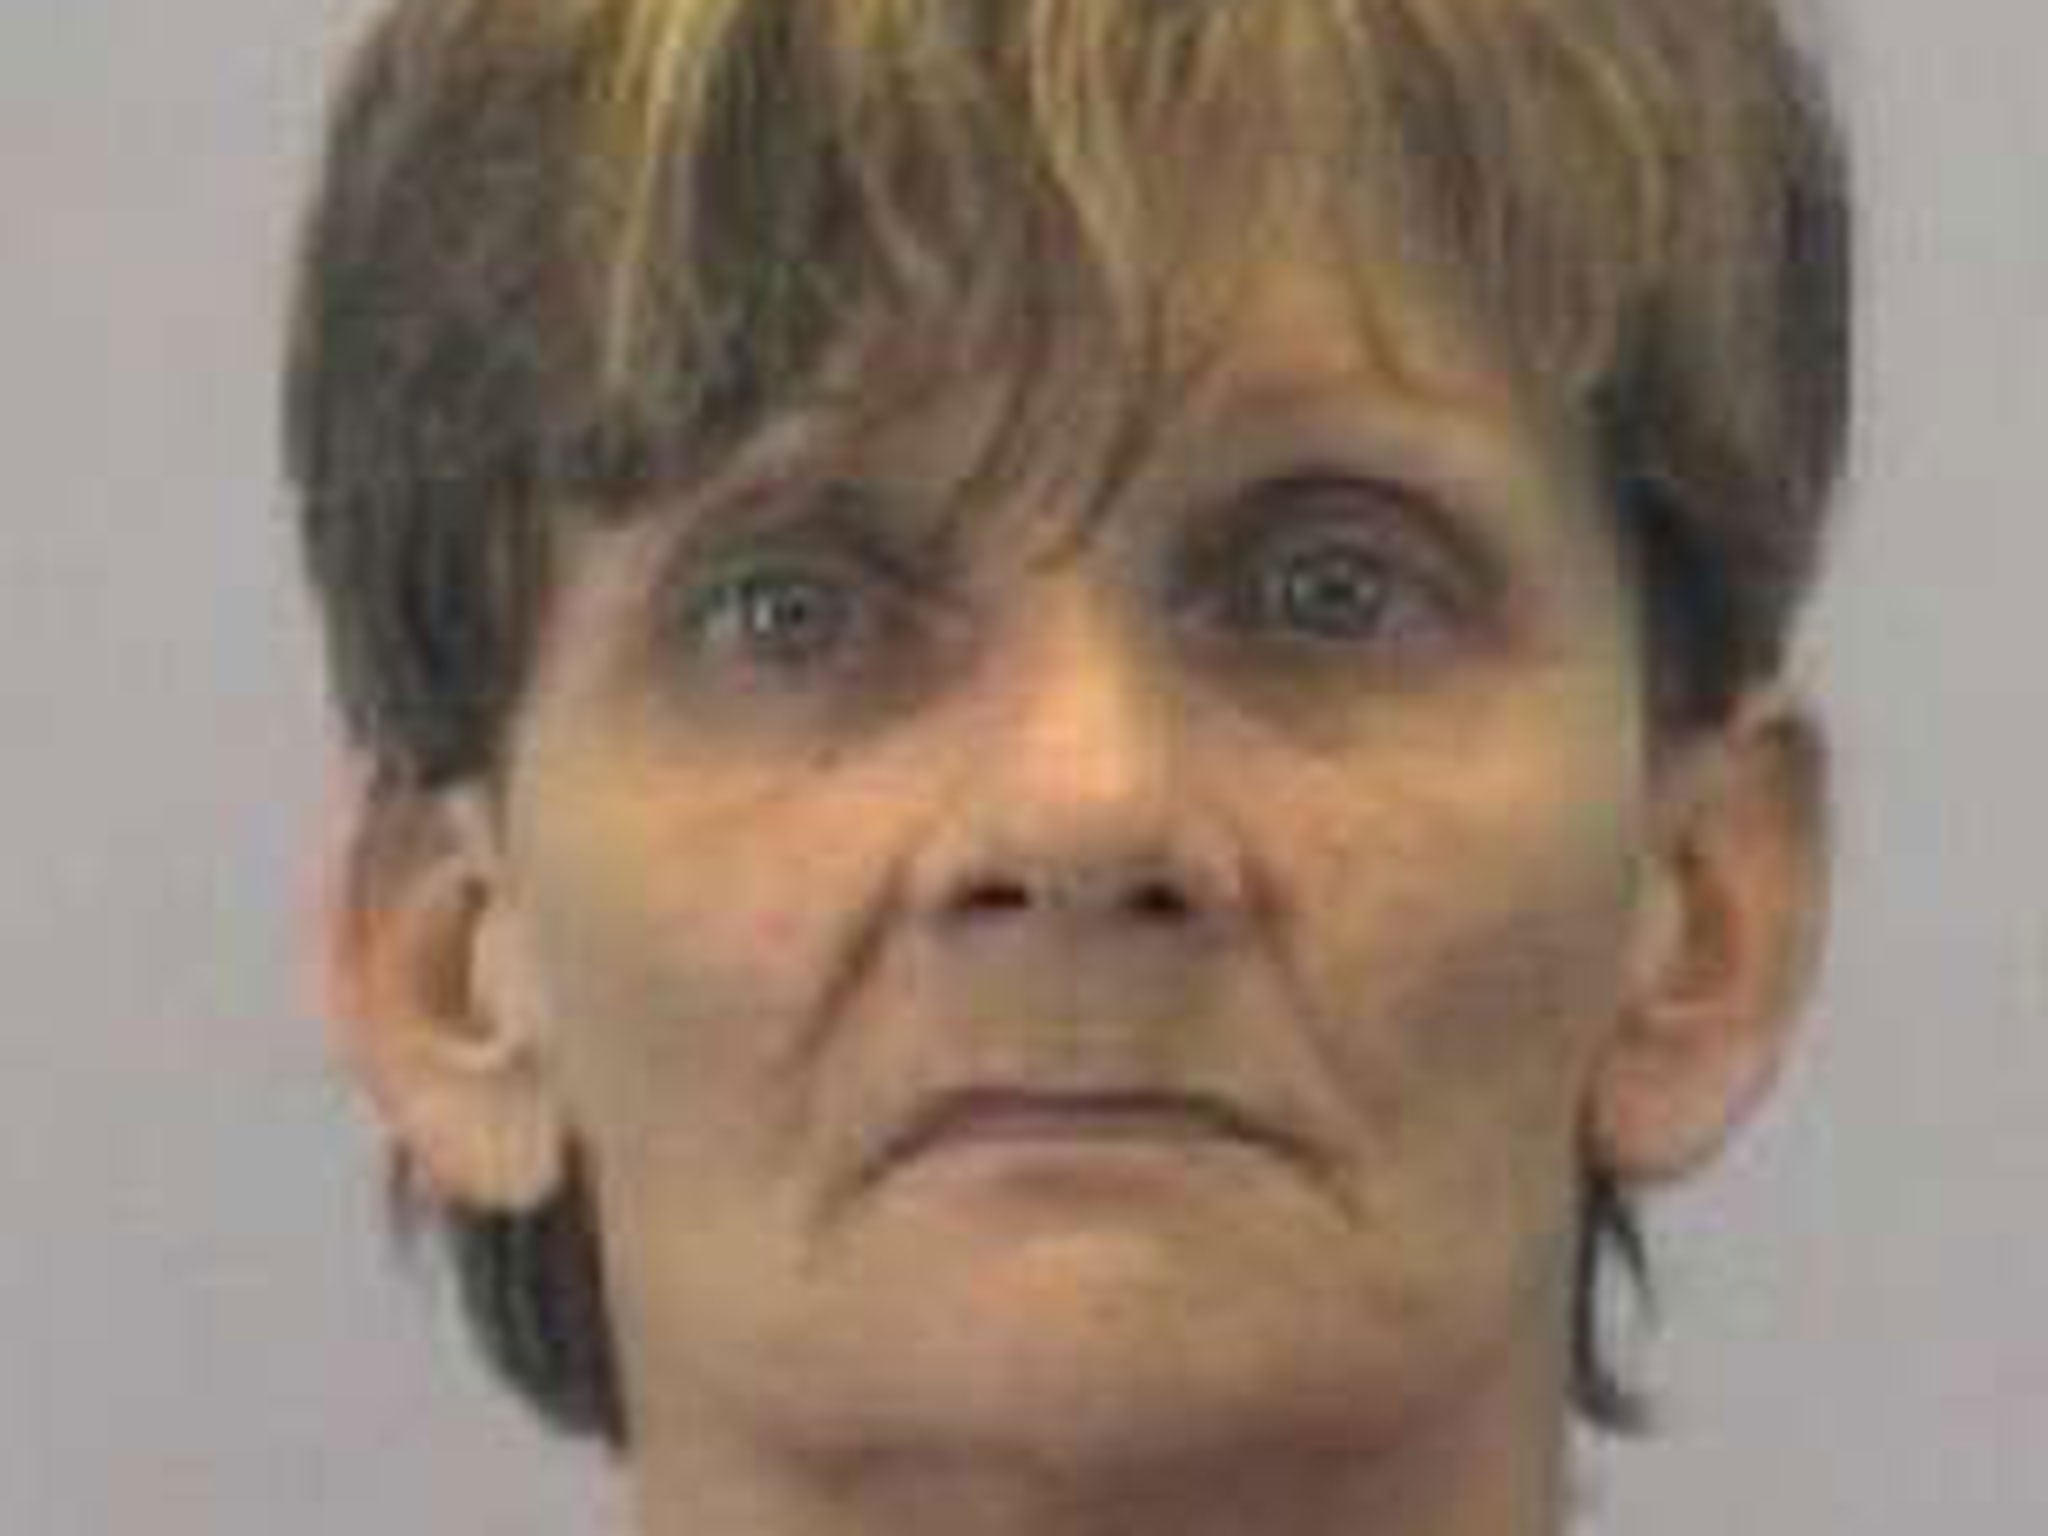 Marcella Jean Lee, 56, was arrested on charges of failing to report a death